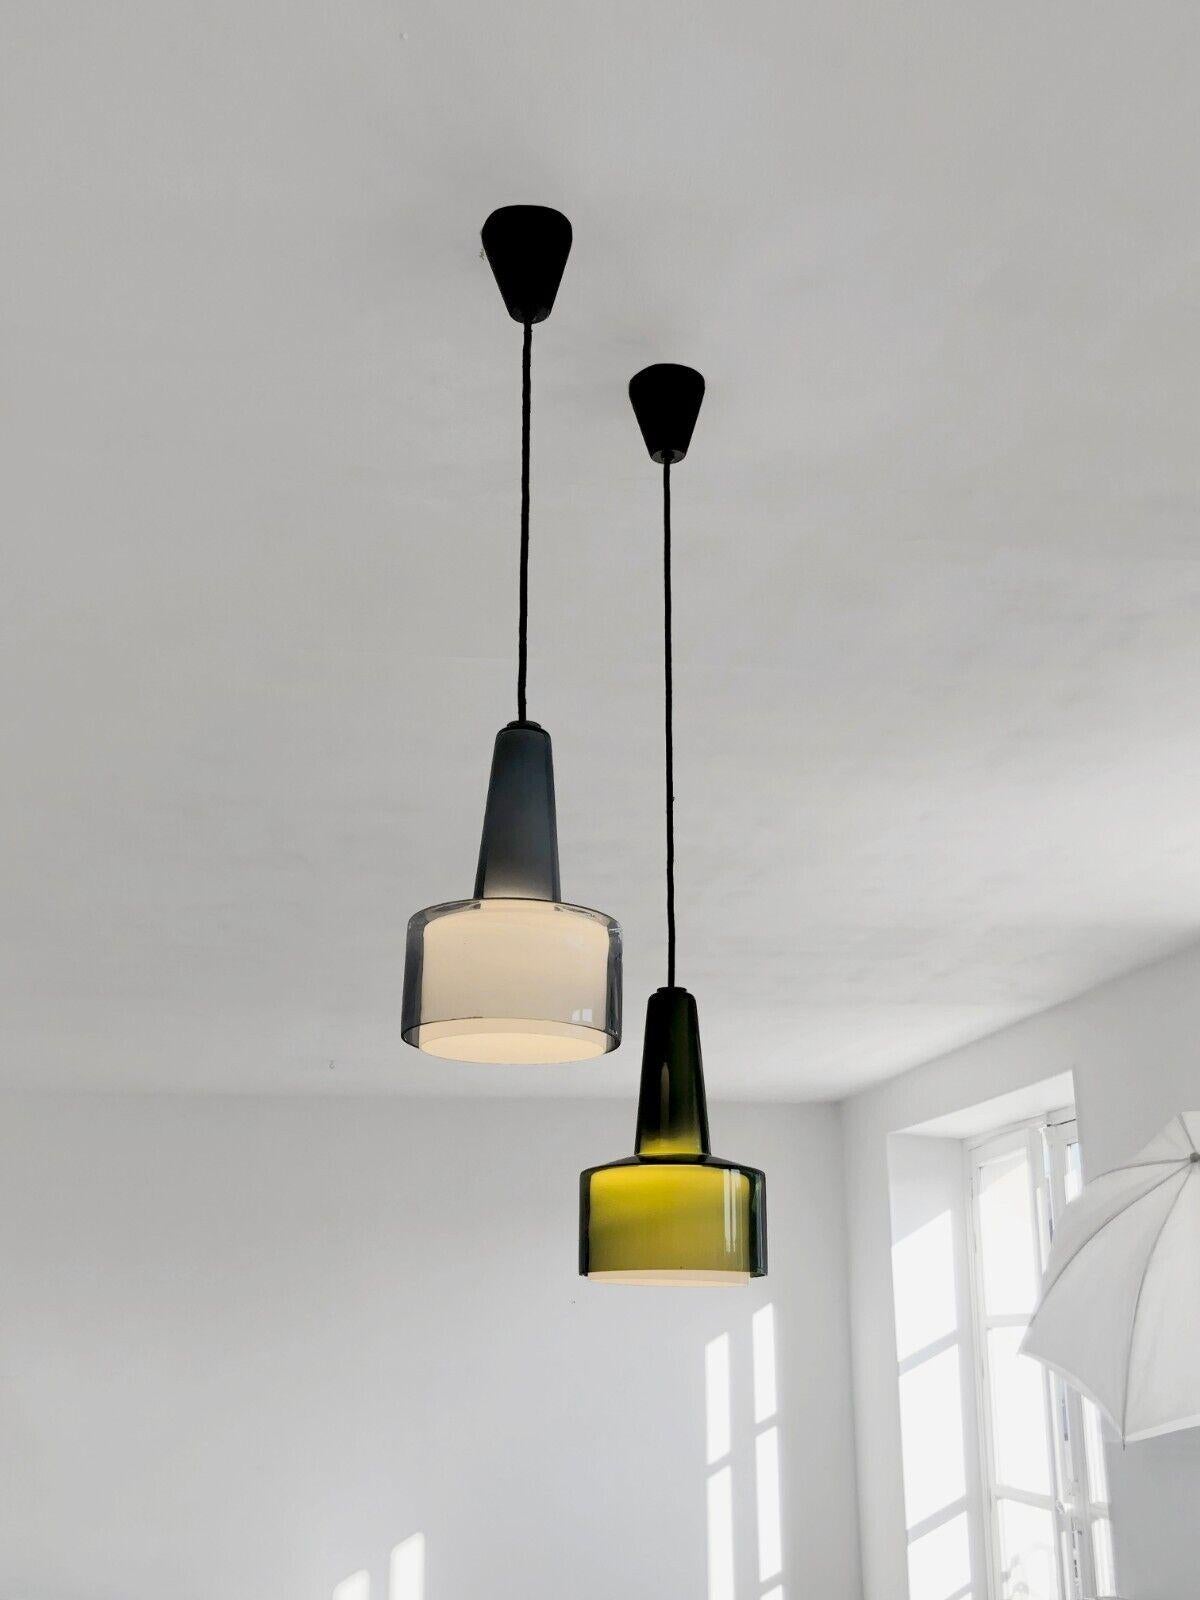 An elegant pair of pendant lights, Modernist, Dansk, Scandinavian, Forme-Libre, each luminaire consisting of 2 suspended glass elements nested one inside the other, exterior element in thick colored glass, interior element in diffusing white opaline